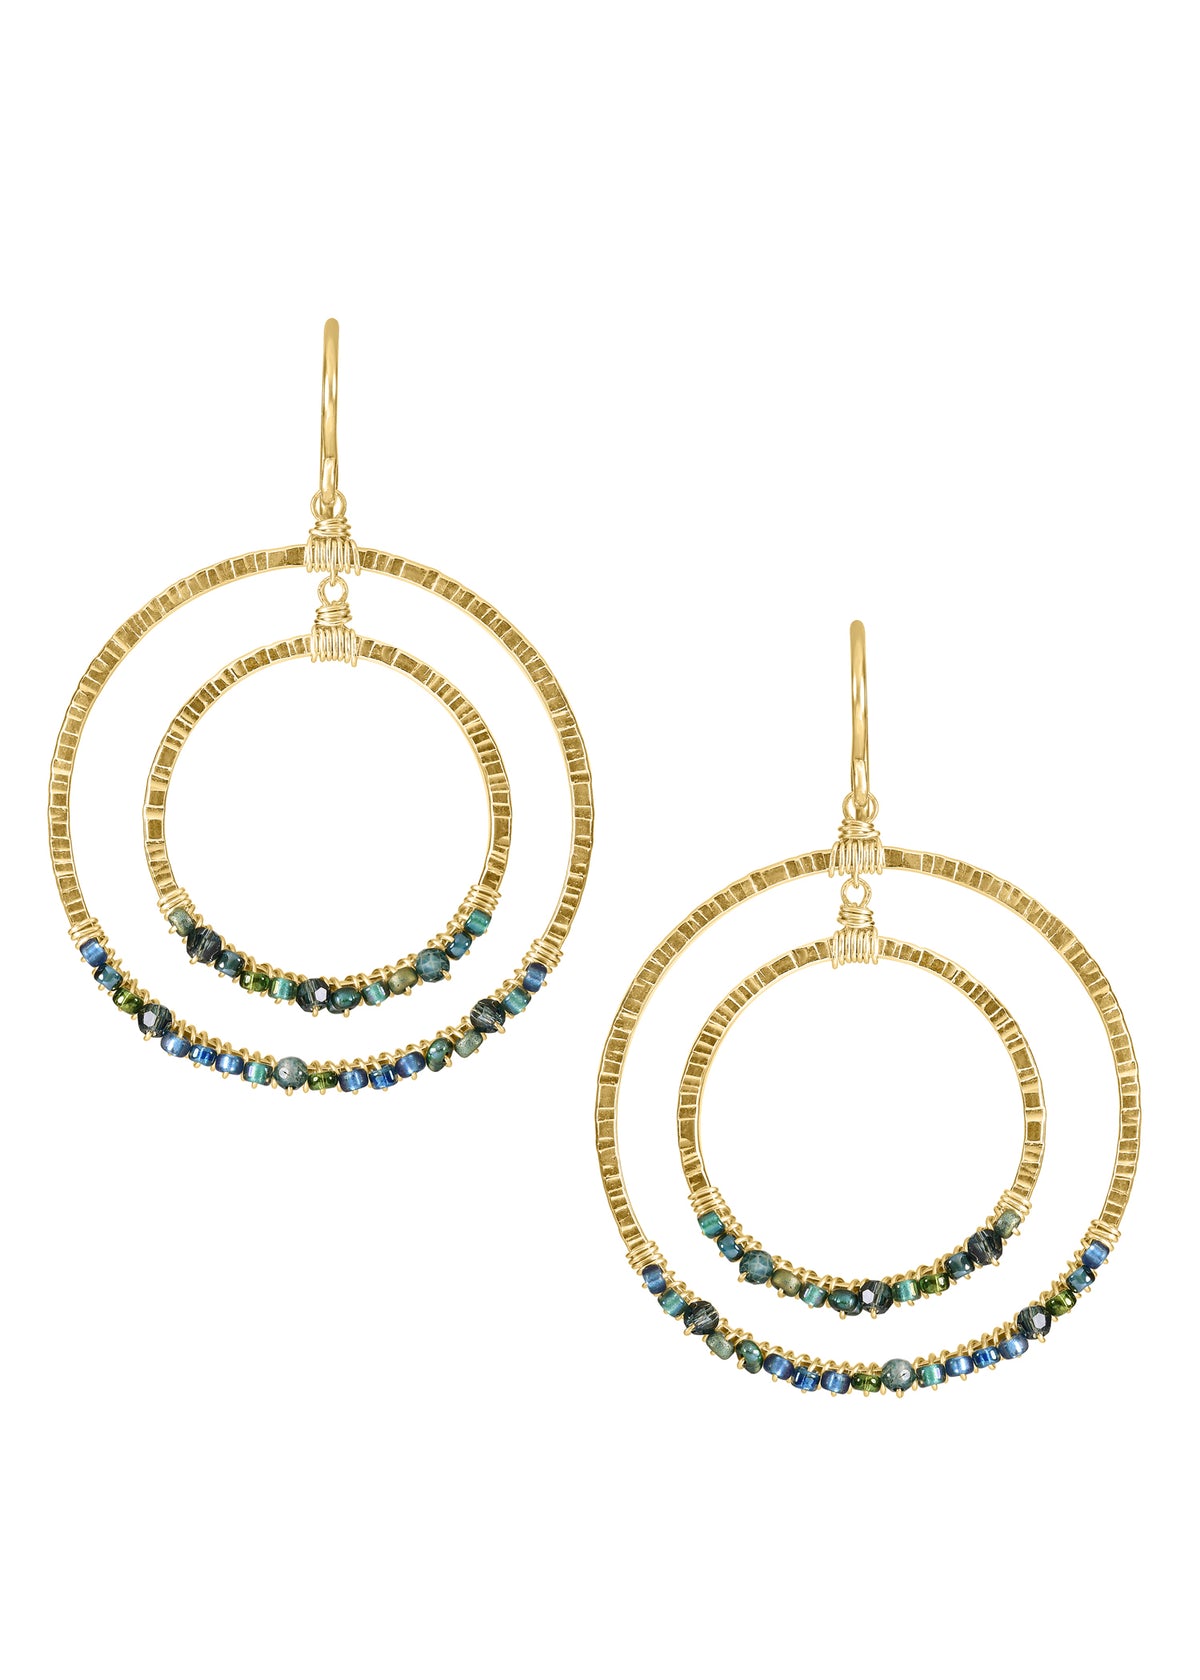 Teal quartz Crystal Seed beads 14k gold fill Earrings measure 1-5/8&quot; in length (including the ear wires) Outer diameter measures 1-3/16&quot; Handmade in our Los Angeles studio